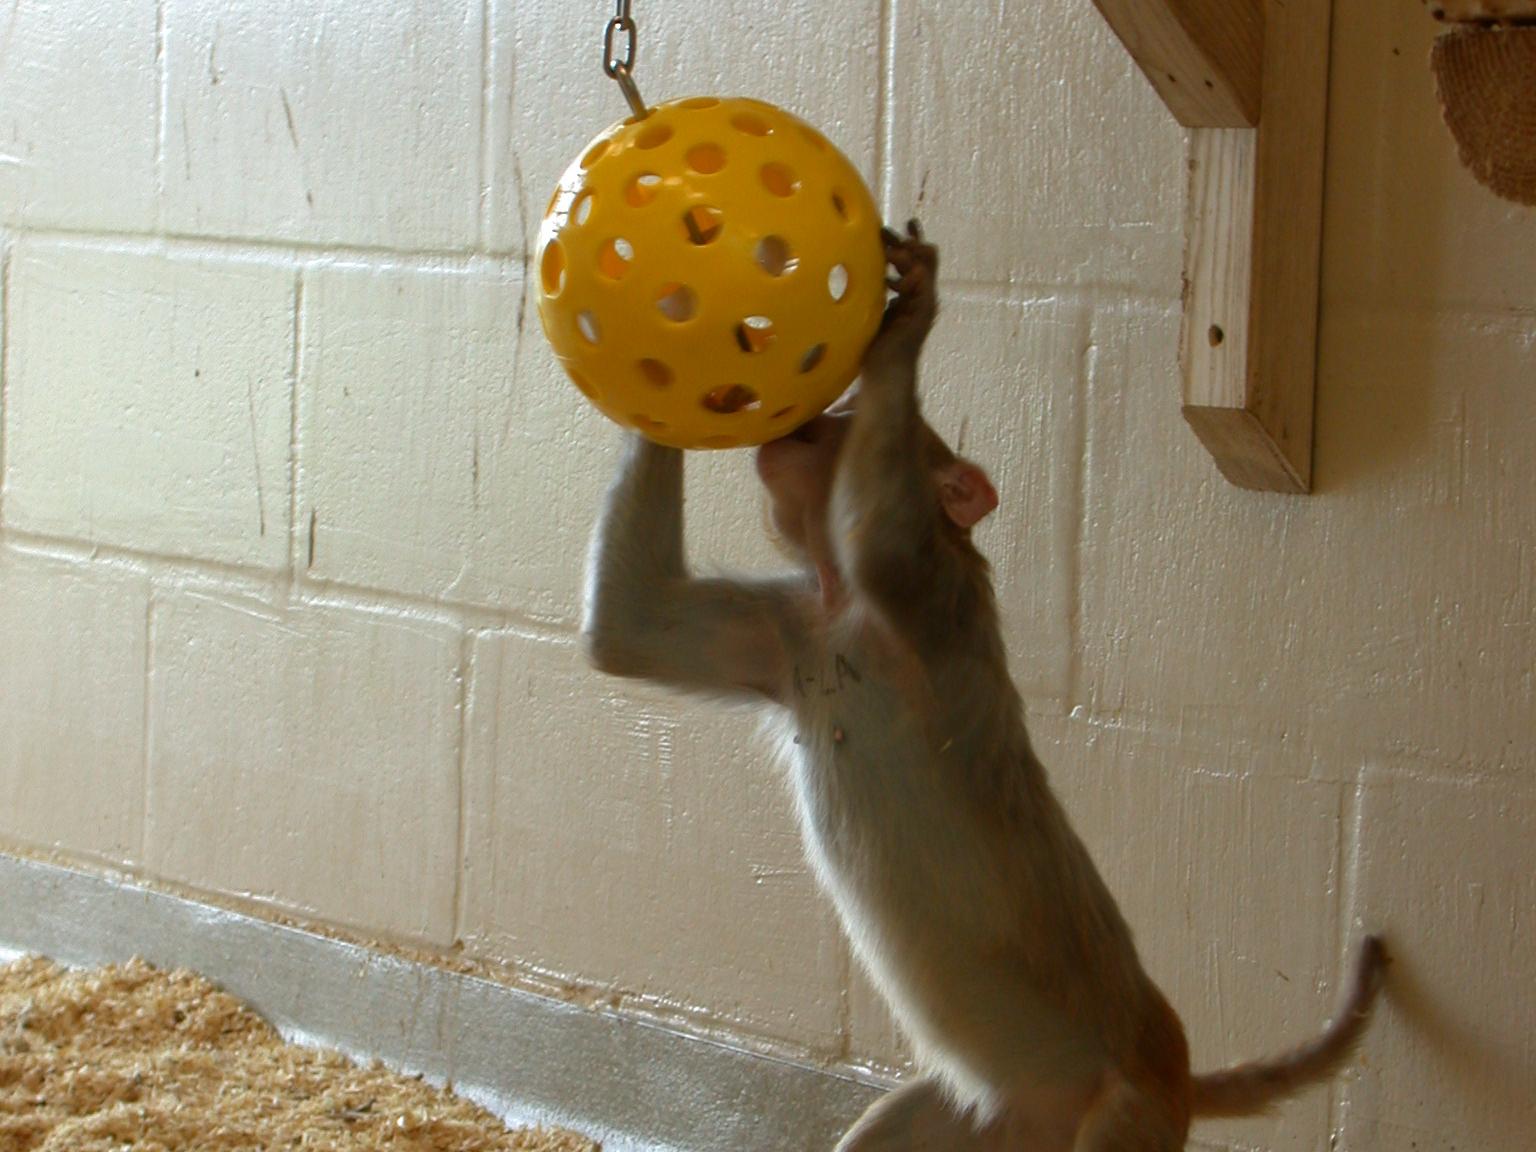 A macaque works on a puzzle feeder that is a ball suspended in the air with small holes in it for macaques to retrieve treats from.JPG 